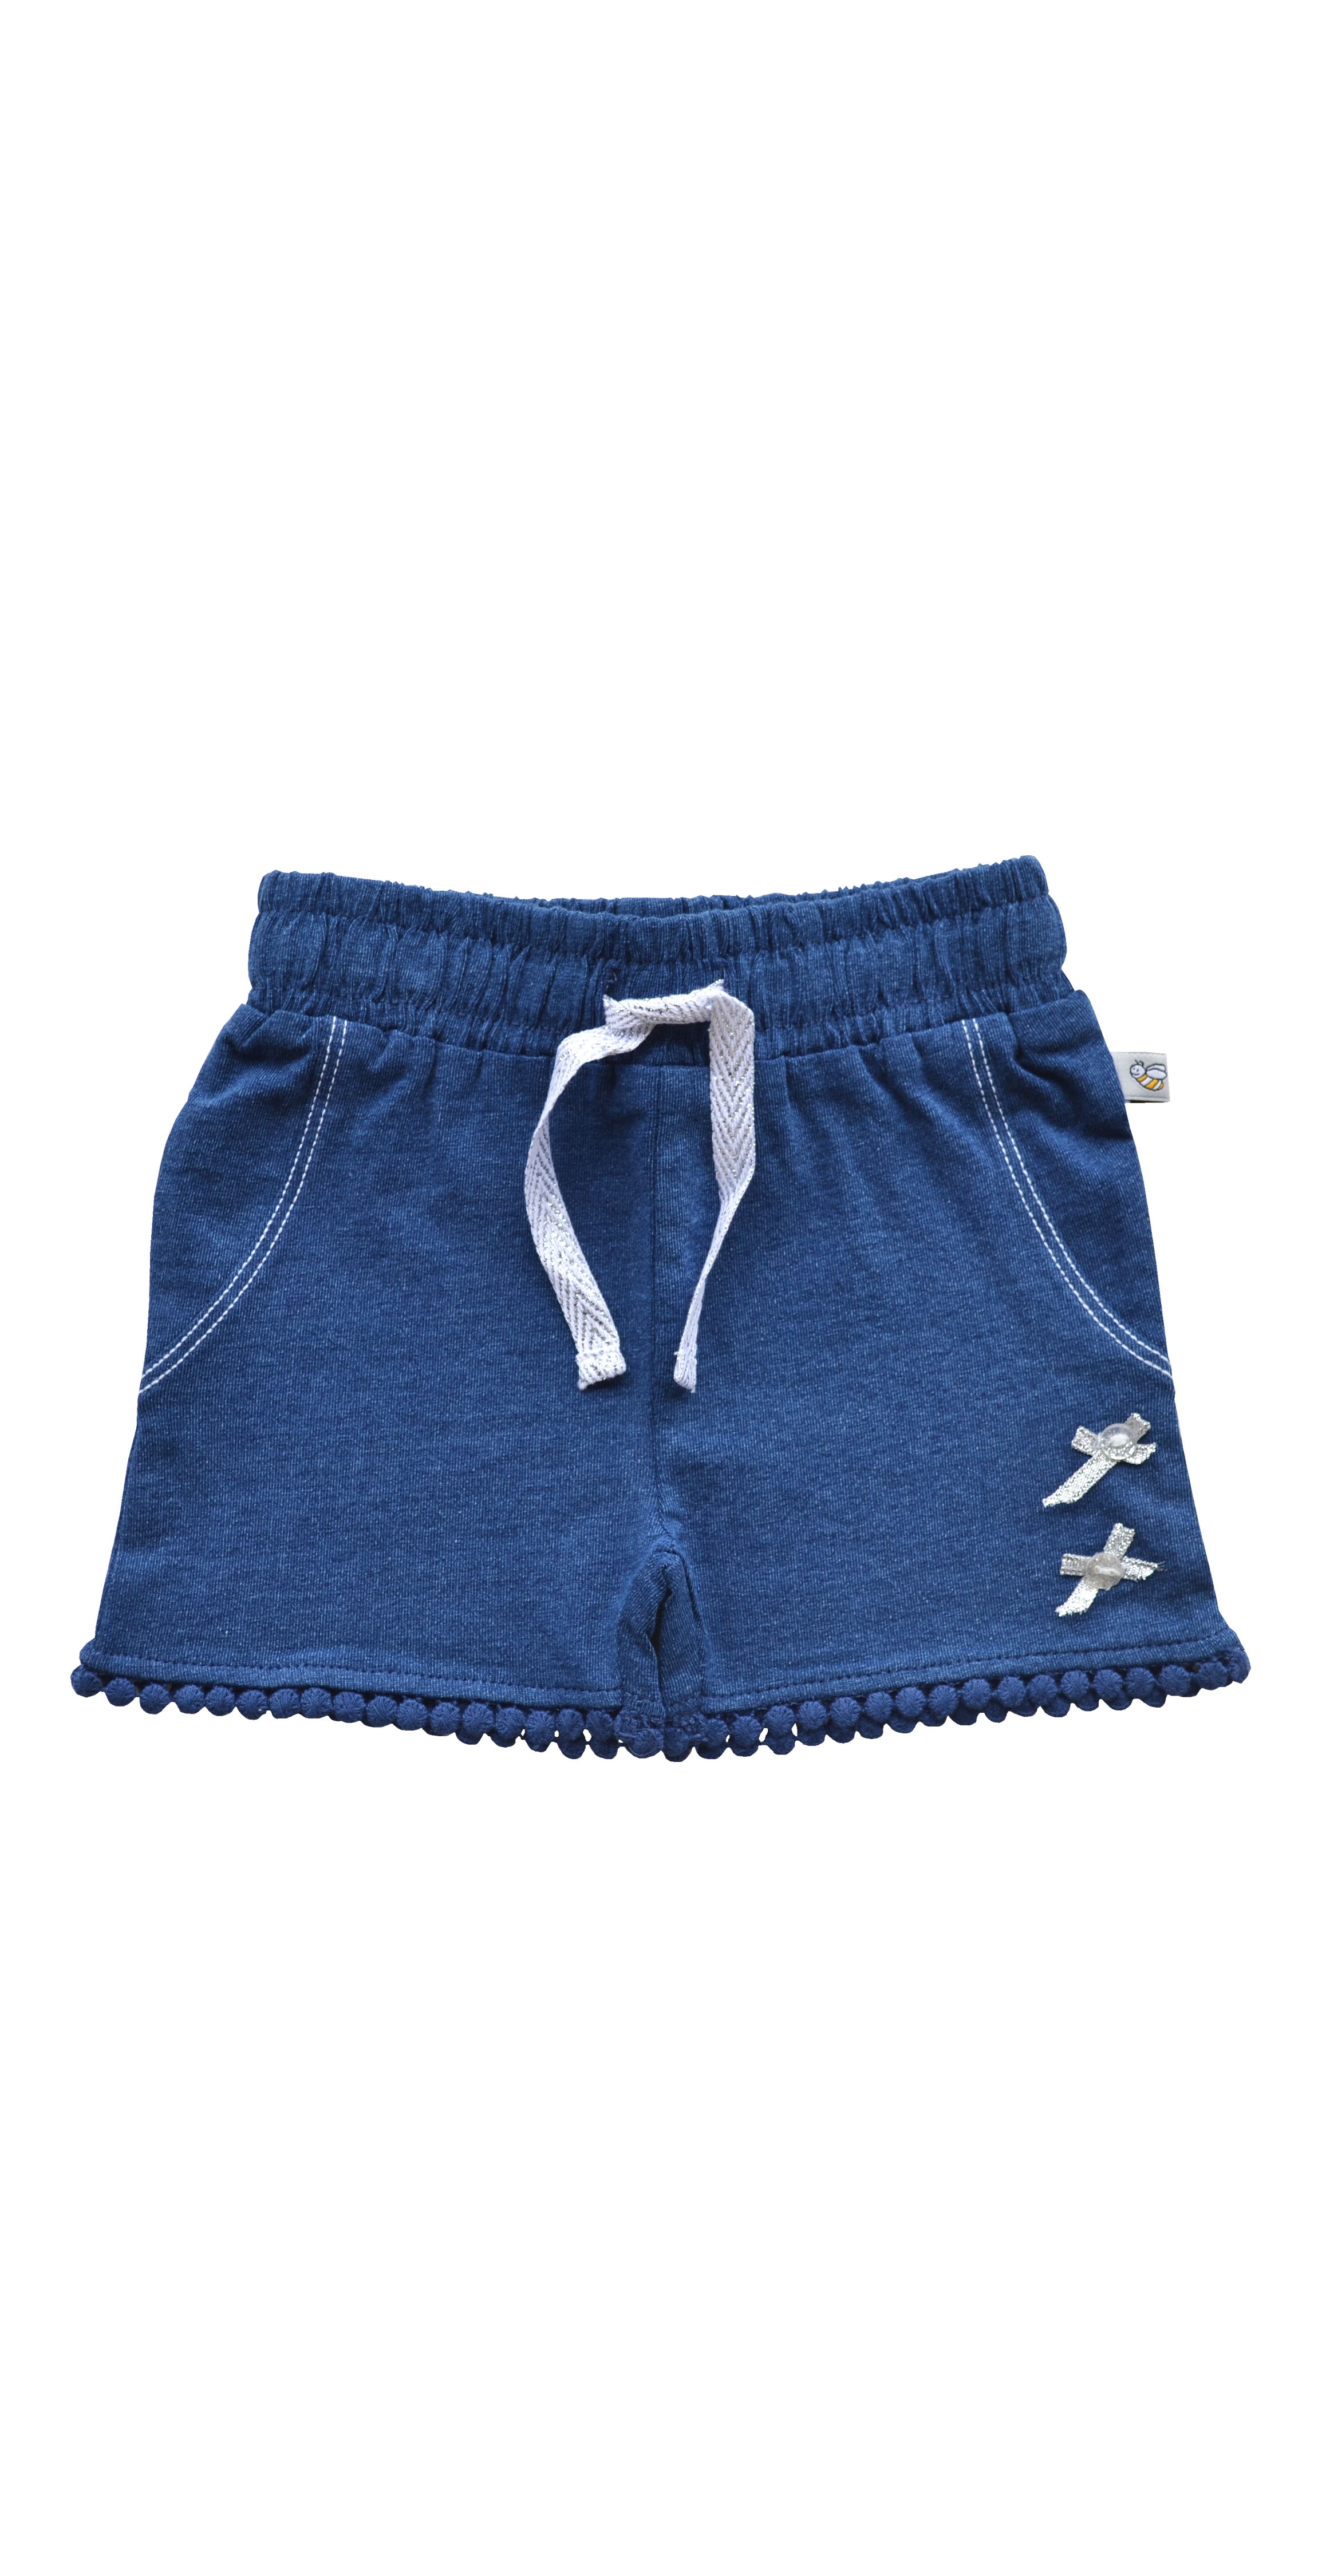 Baby Girl Denim Shorts with Bow Applique(95% Cotton 5% Elasthan)